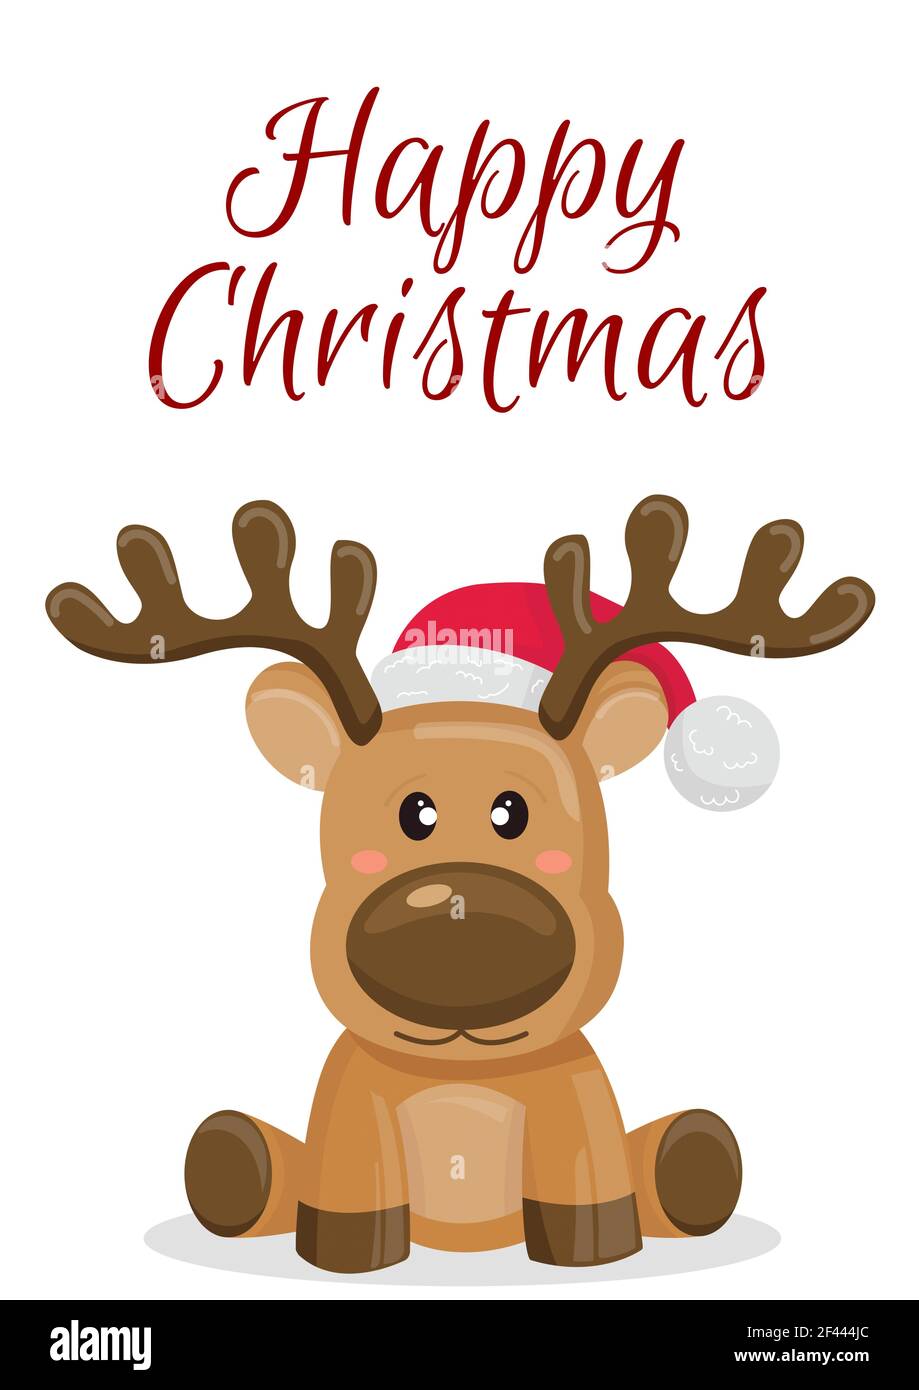 Digitally generated image of happy christmas text over baby reindeer wearing santa hat Stock Photo